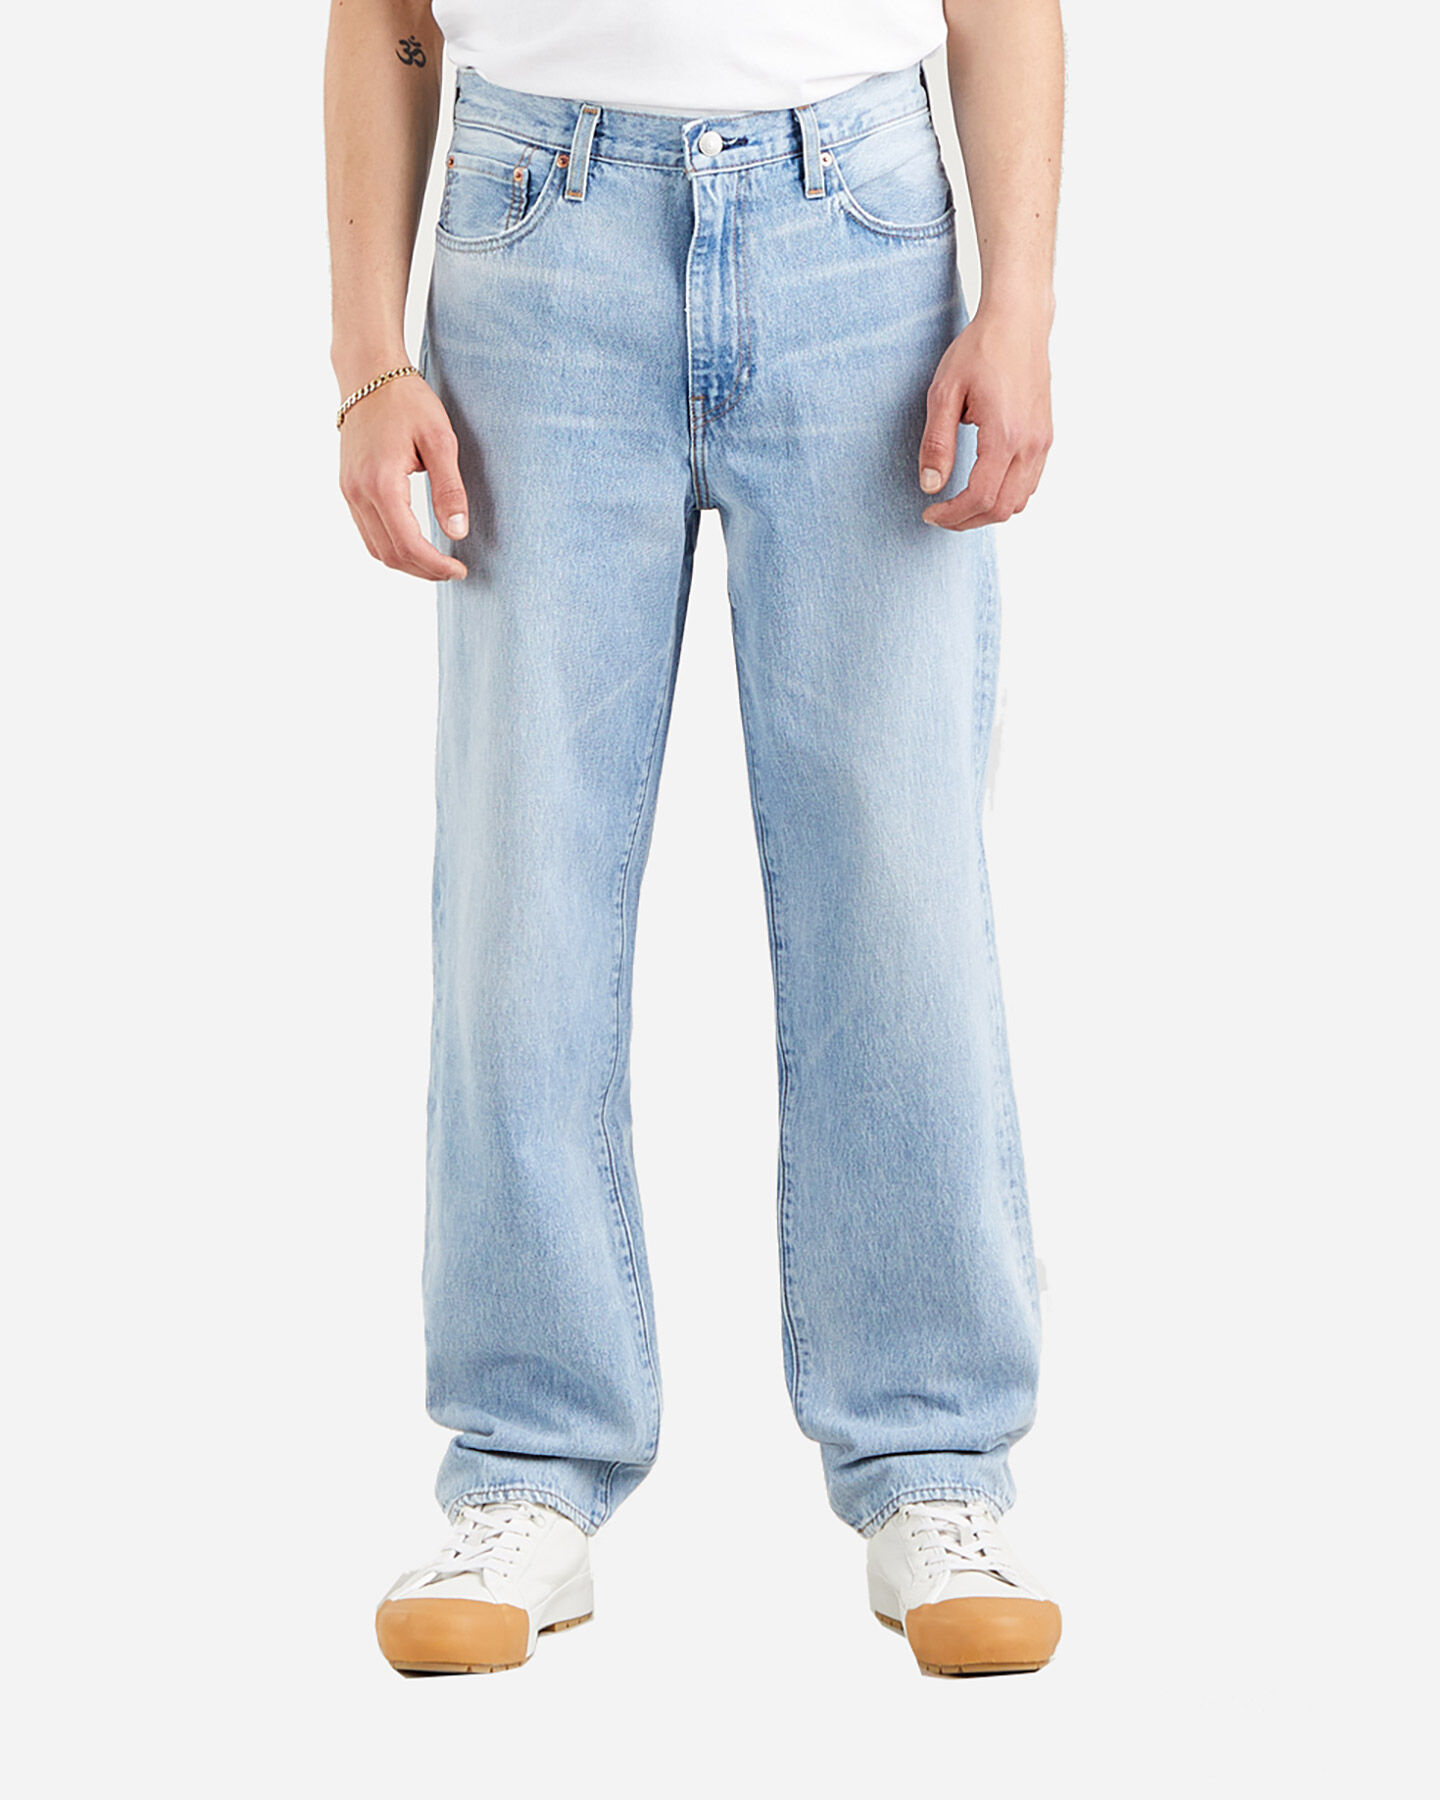  Jeans LEVI'S STAY LOOSE M S4103070|0027|29 scatto 0